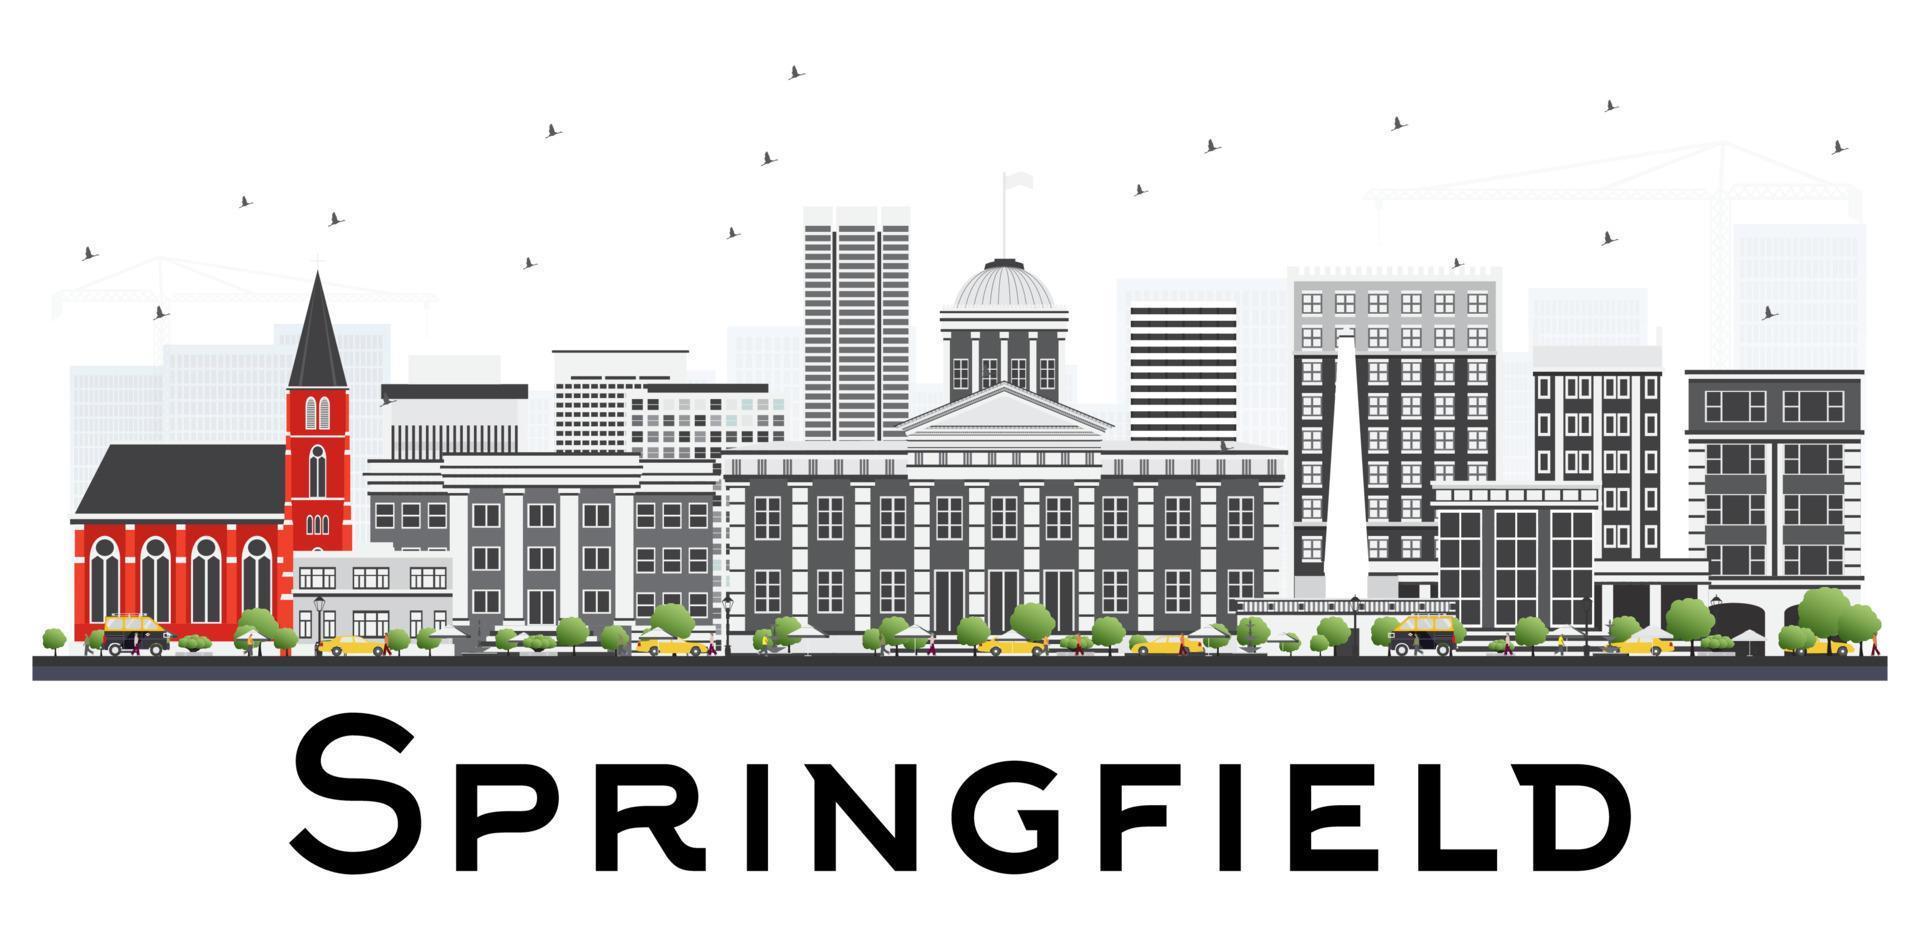 Springfield Skyline with Gray Buildings Isolated on White Background. vector